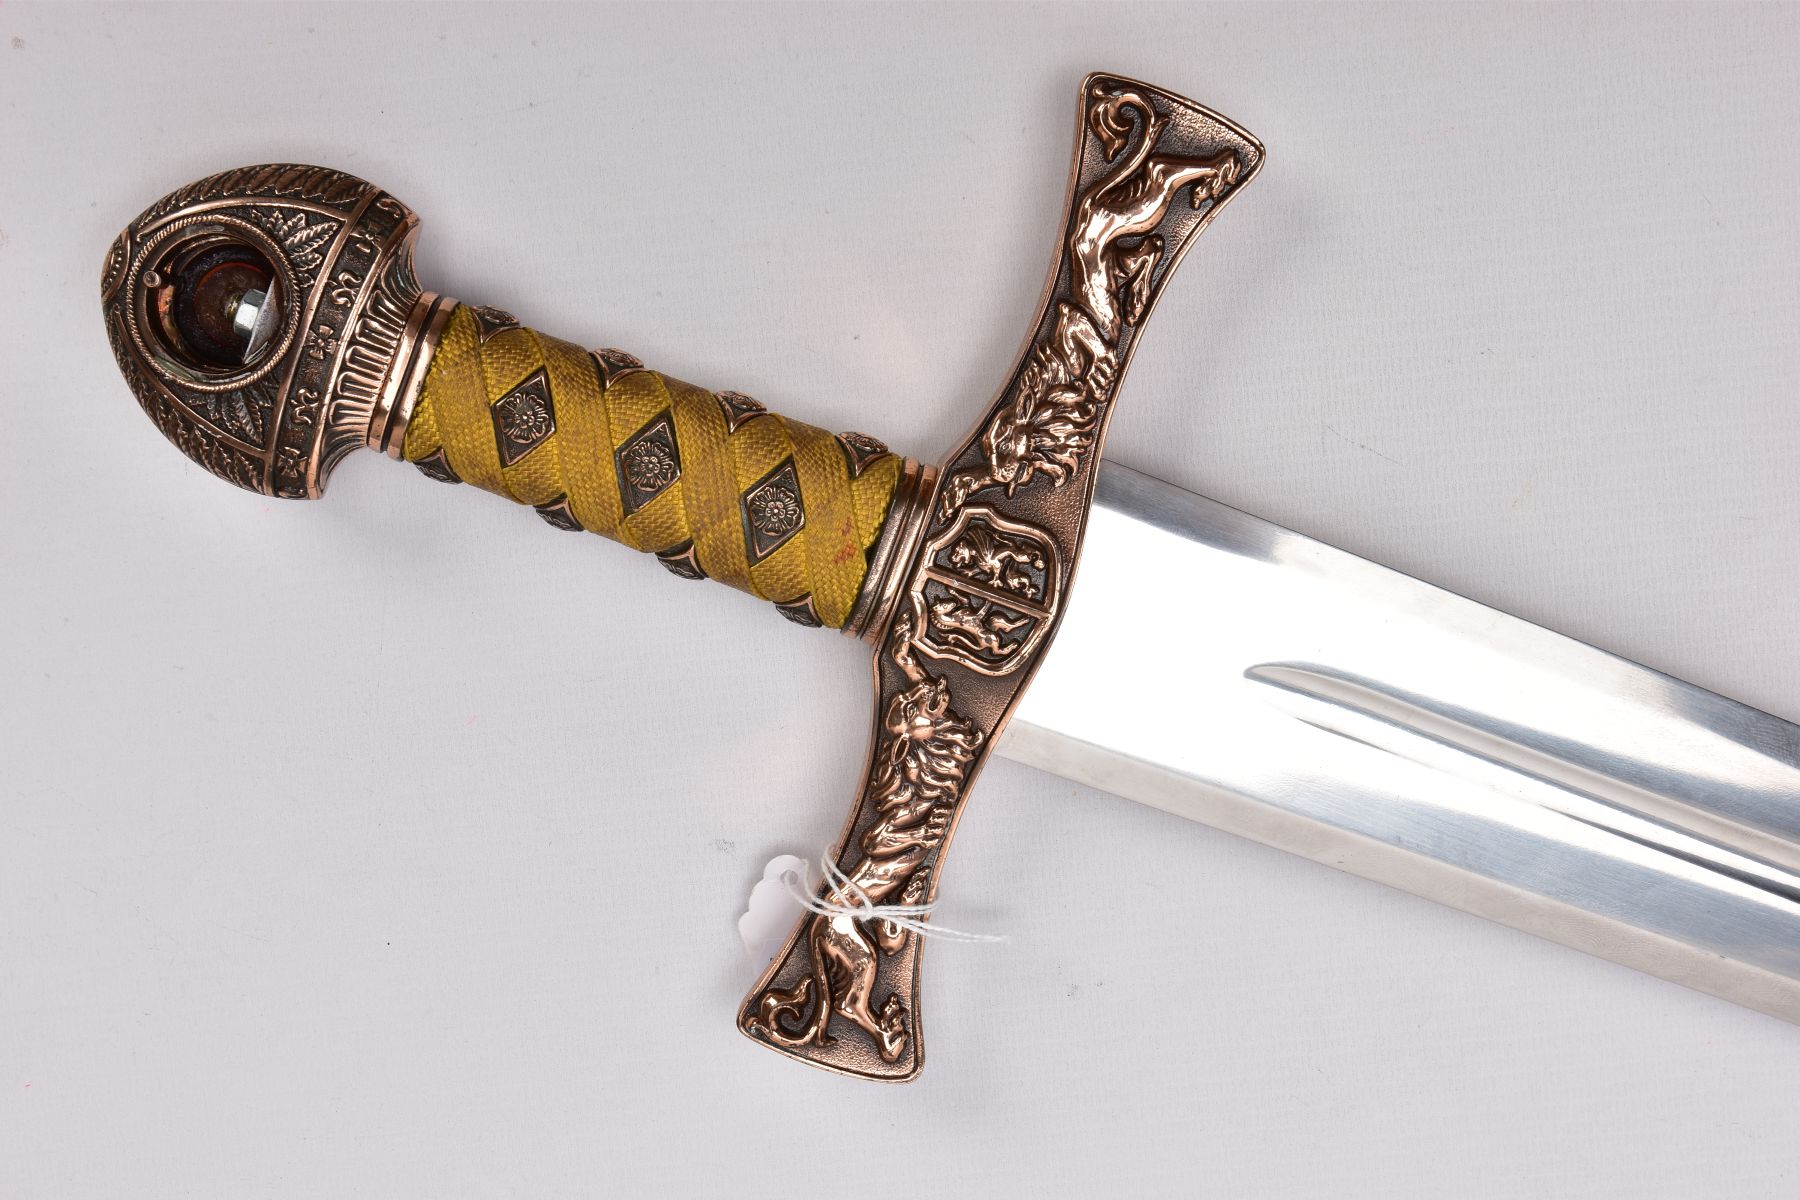 TWO REPLICA COPY SWORDS, a Medieval style sword, with approximately 83cm length blade, slightly - Image 7 of 9